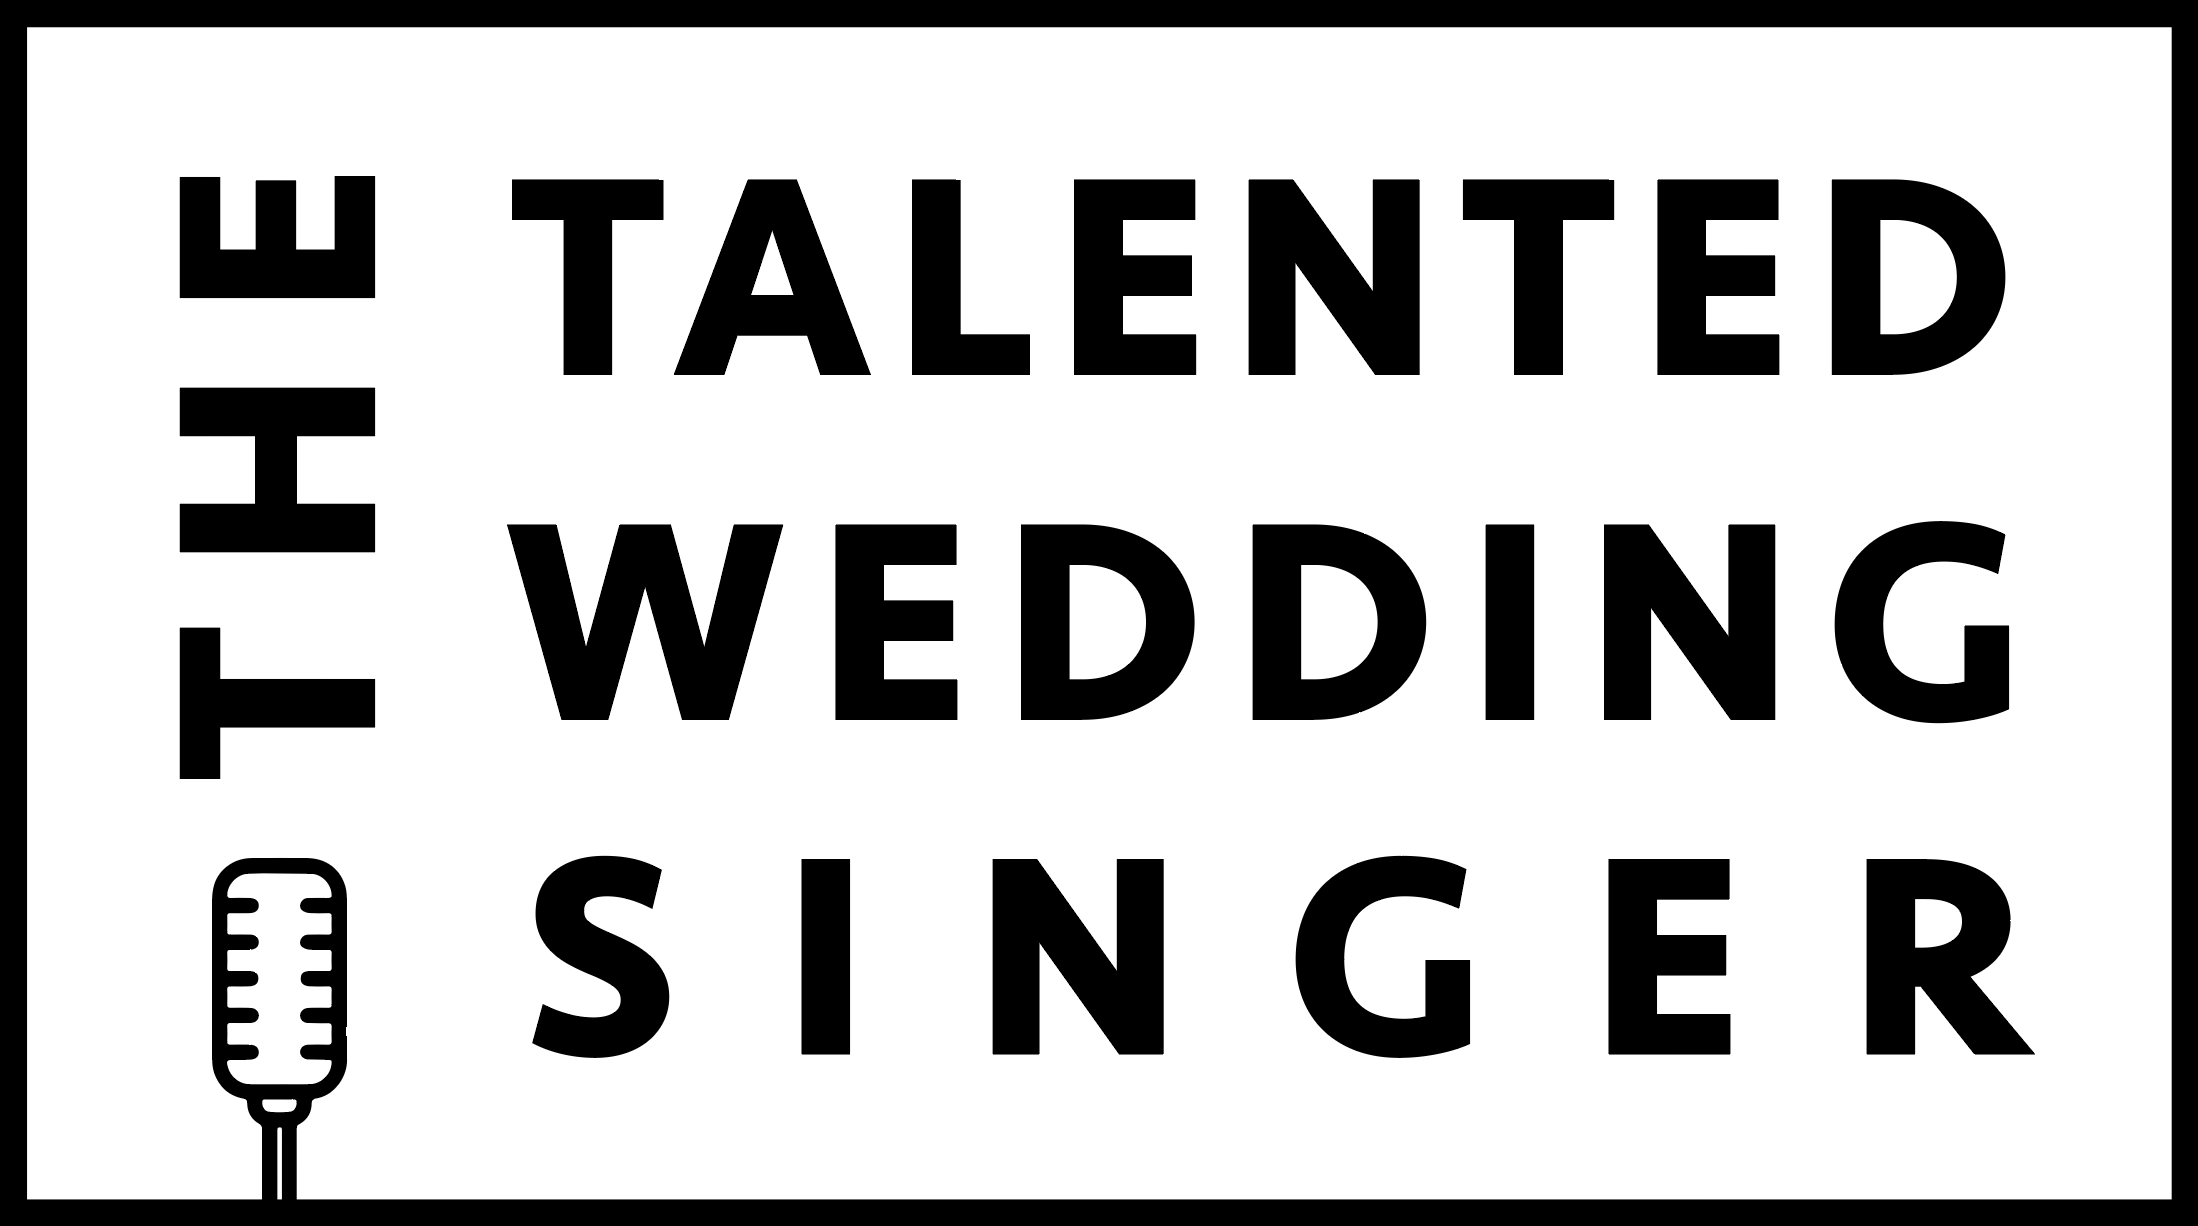 The Talented wedding singer